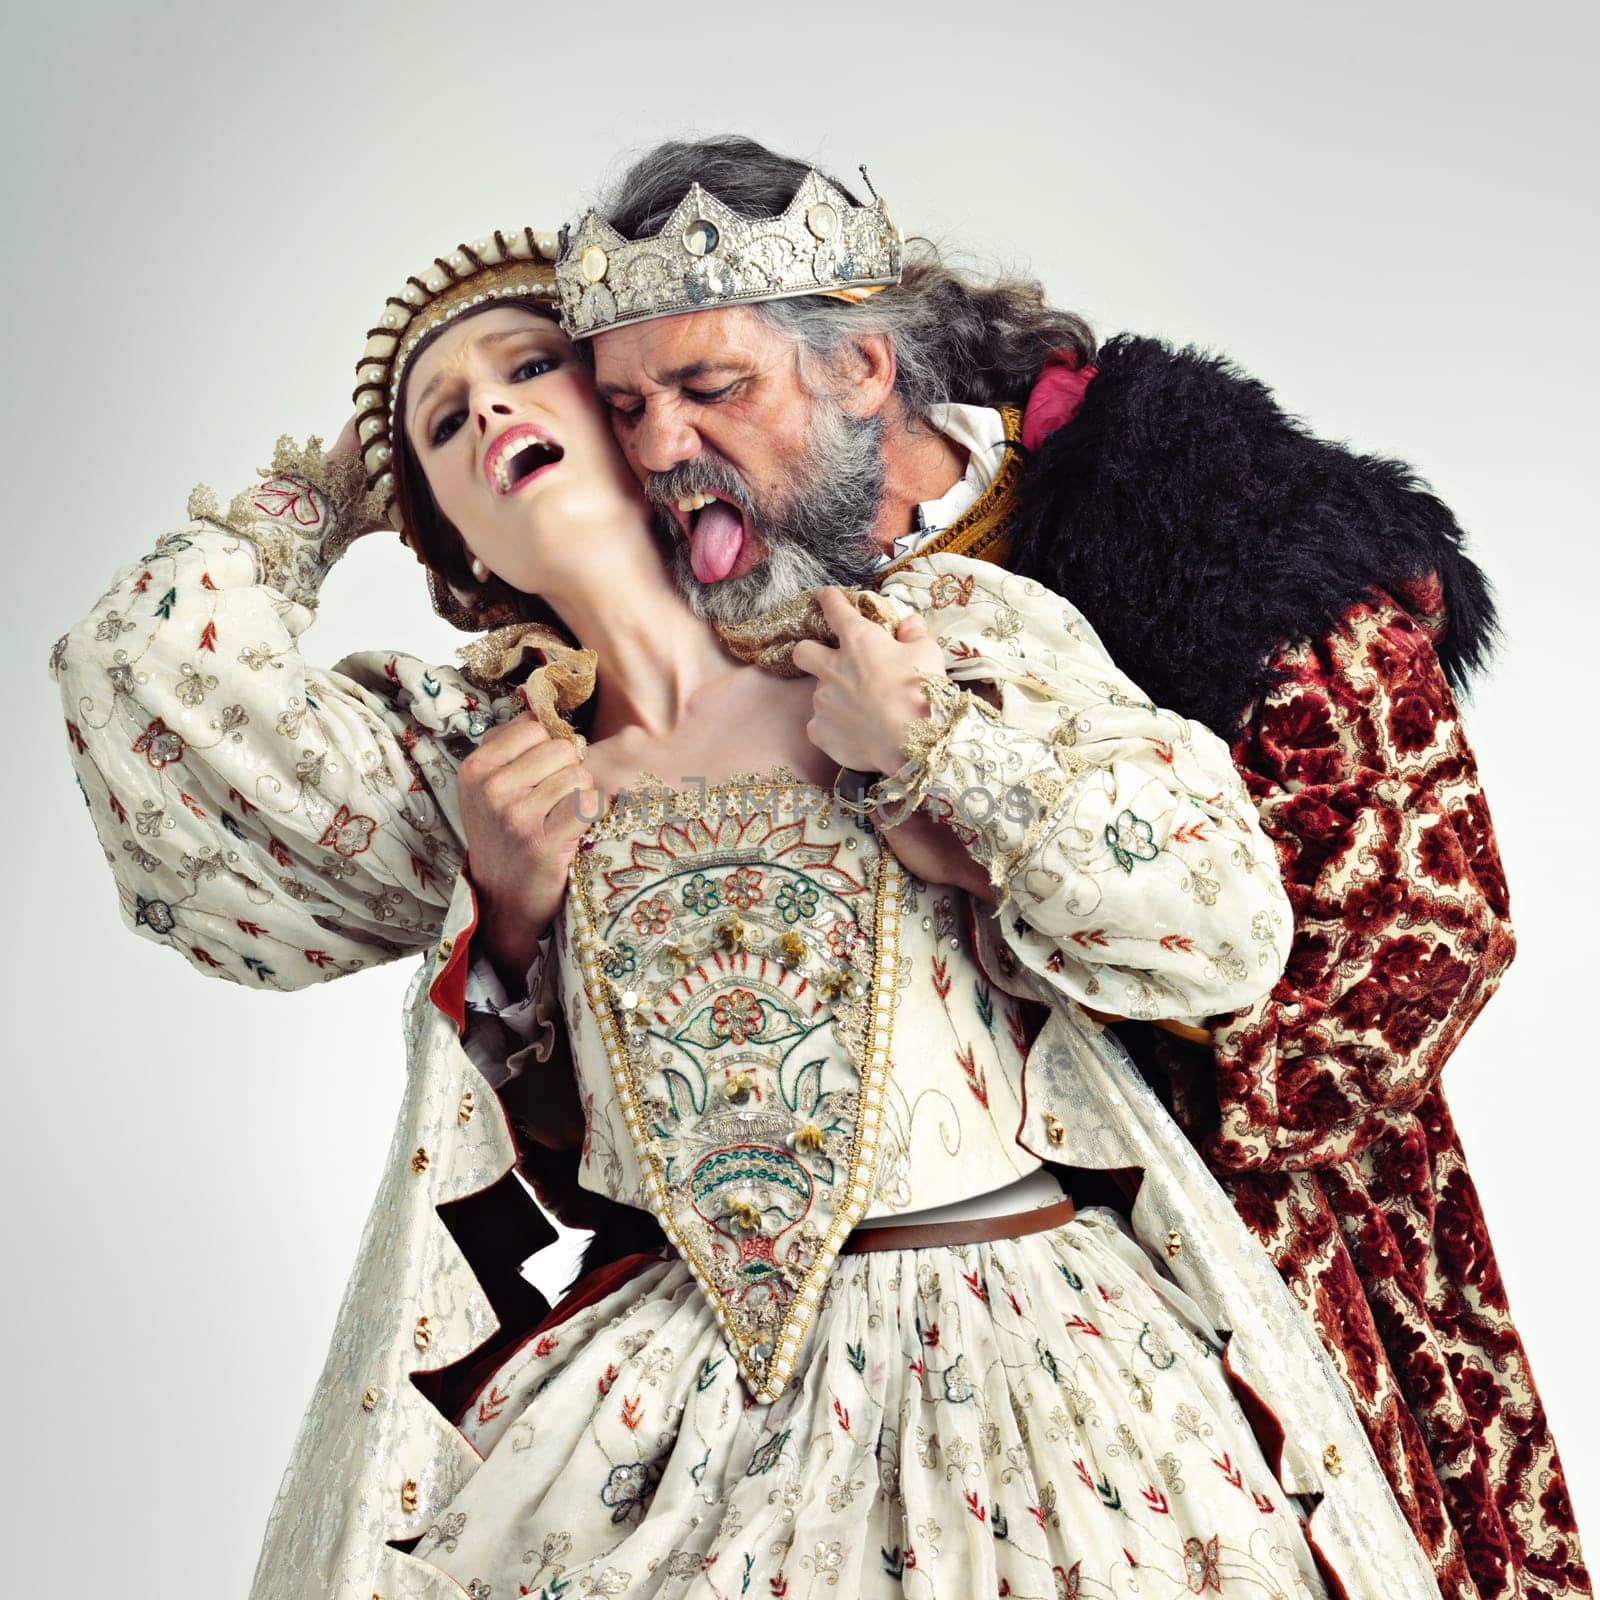 King, queen and love of couple in studio isolated on a gray background. Vintage royalty, retro victorian and affection, romance and passion of royal man and woman with crown kissing, embrace and hug